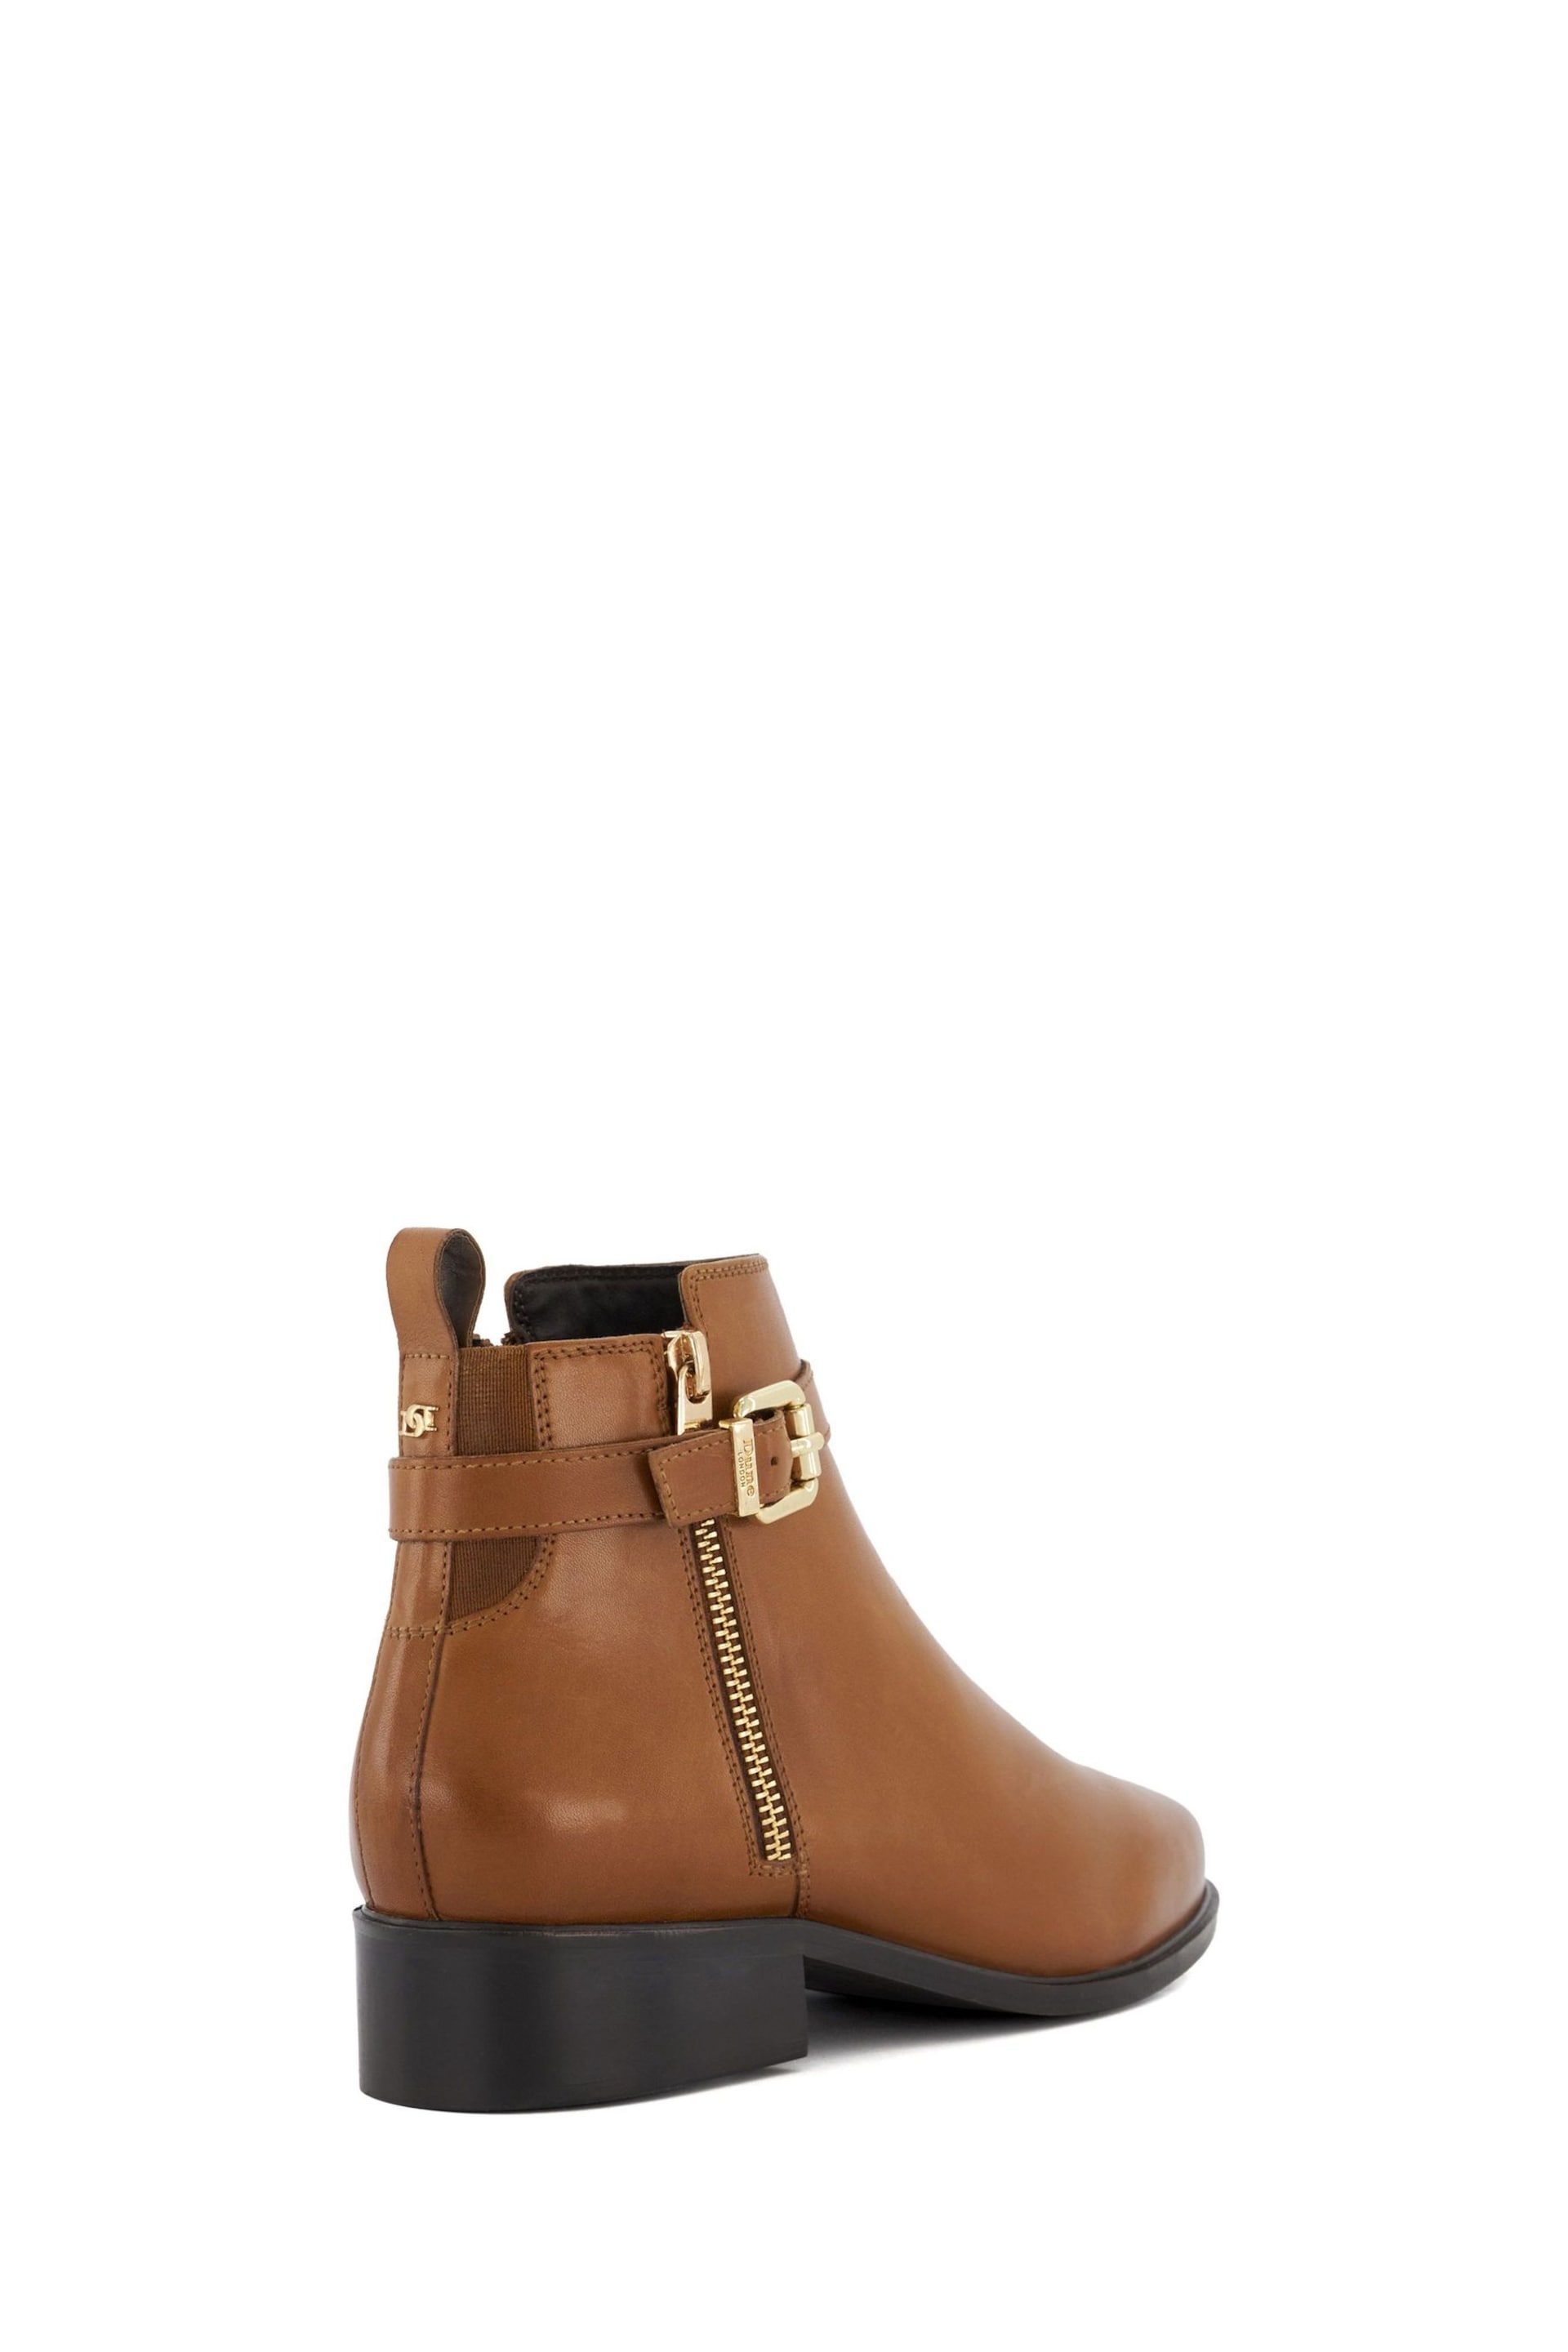 Dune London Brown Pepi Branded Trim Ankle Boots - Image 5 of 6